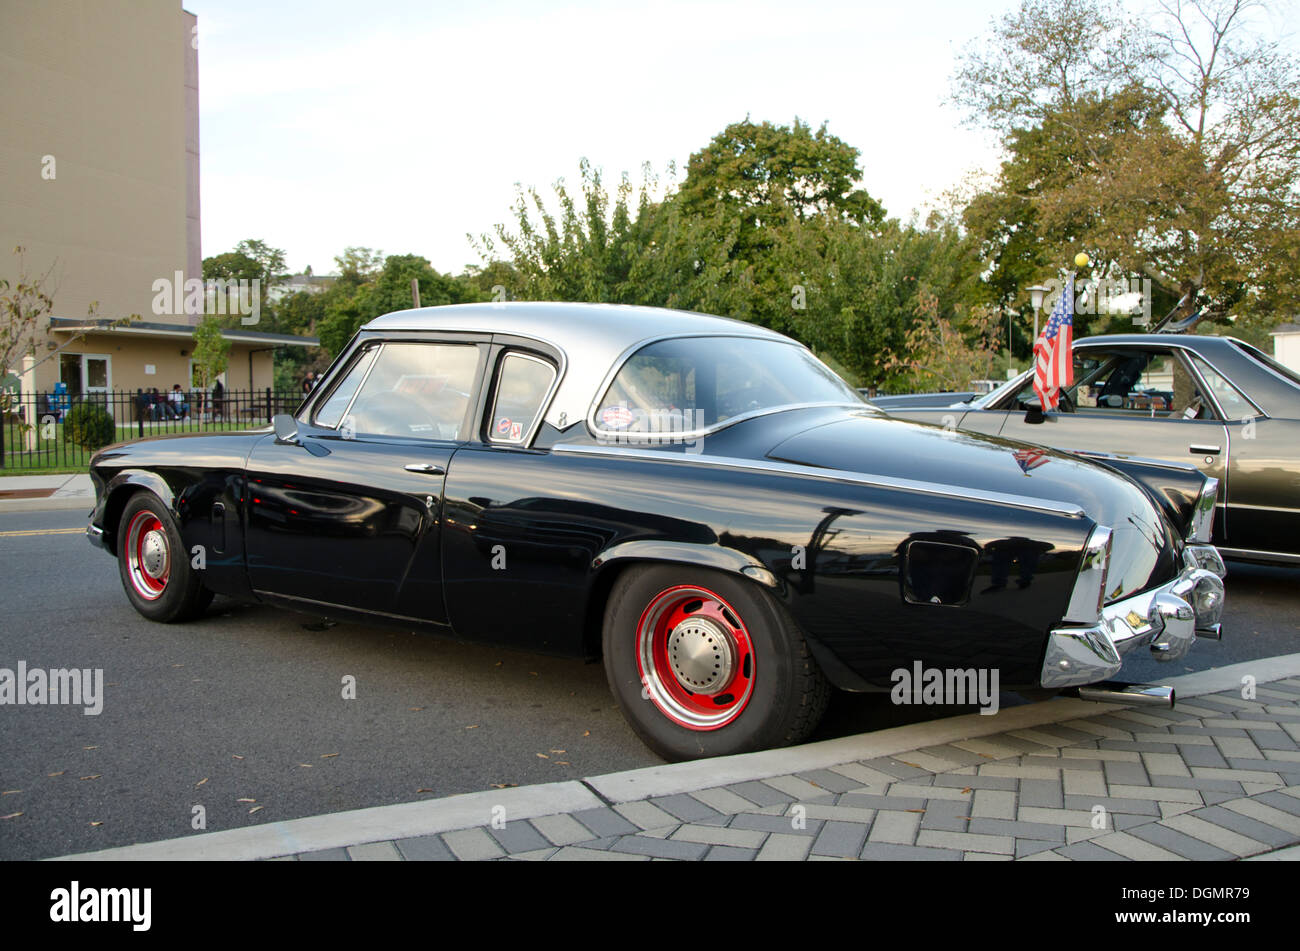 A Studebaker Commander from the fifties on display during a classic historic car show in New Jersey, USA. Stock Photo